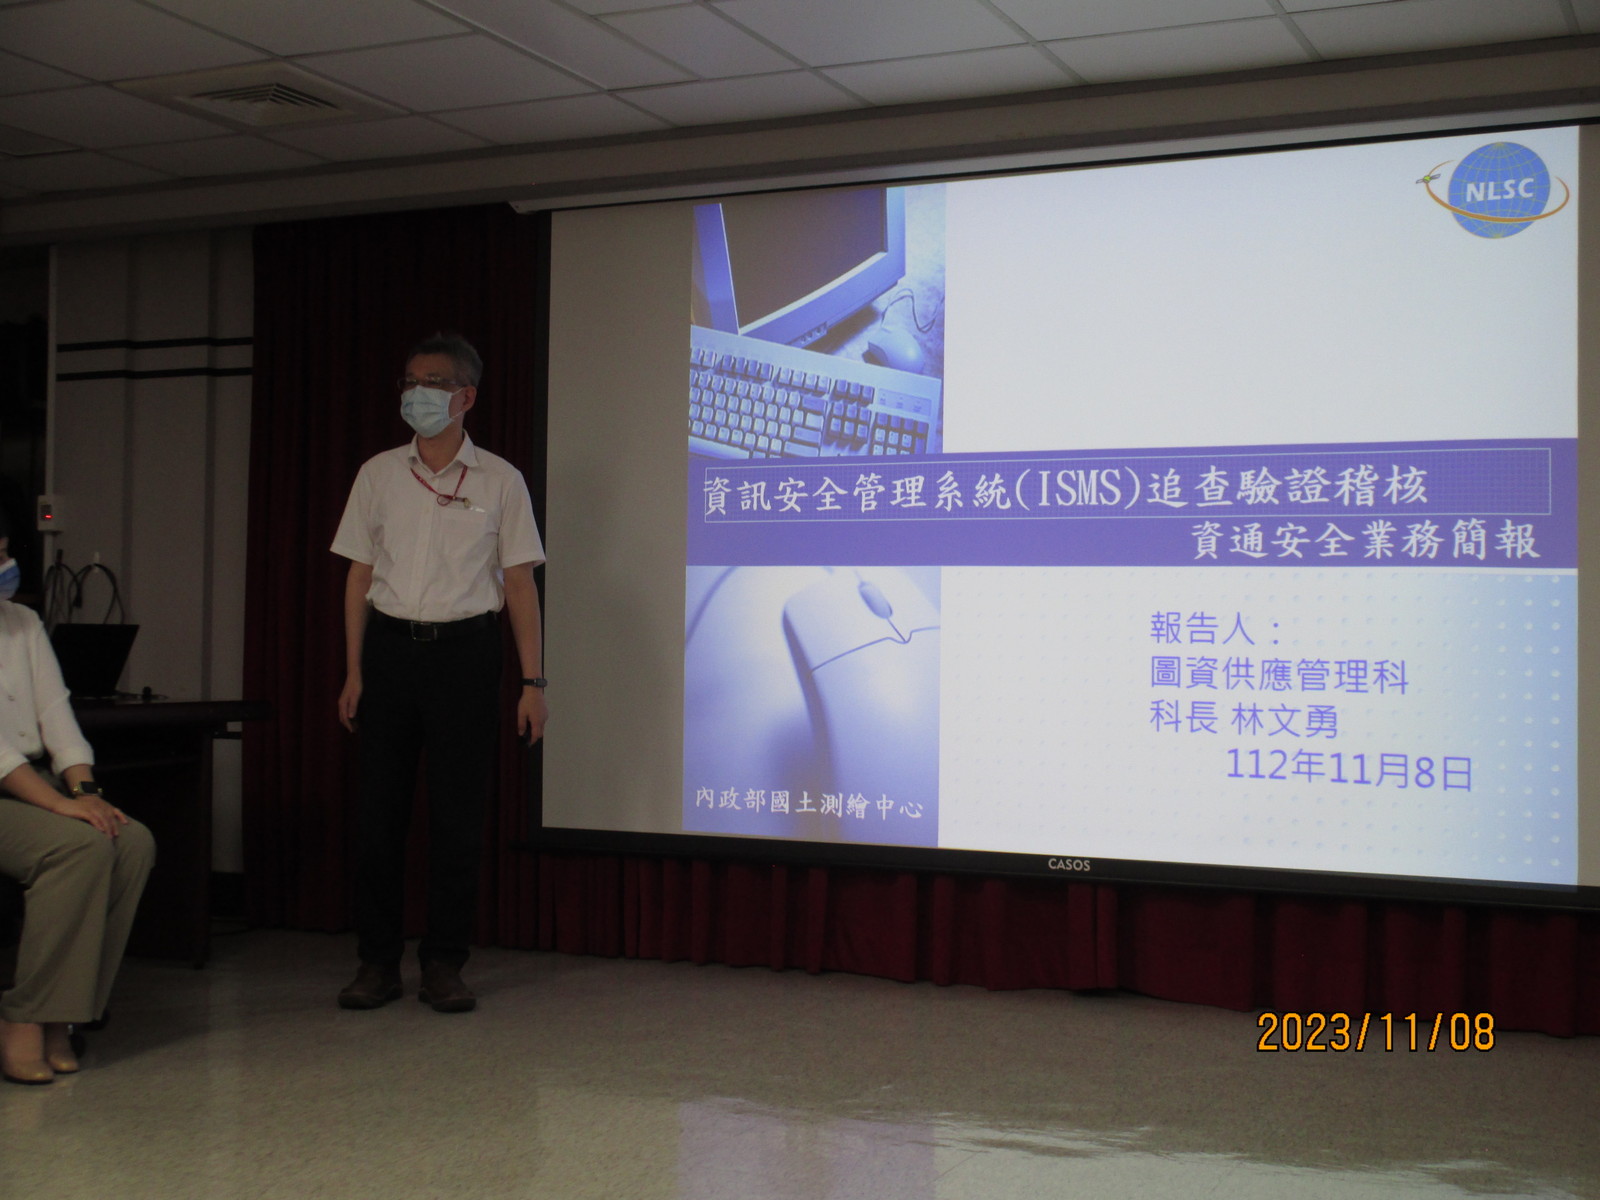 The presentation by the section chief, Lin, Wen-Yung, was the executive about the situation of ISMS